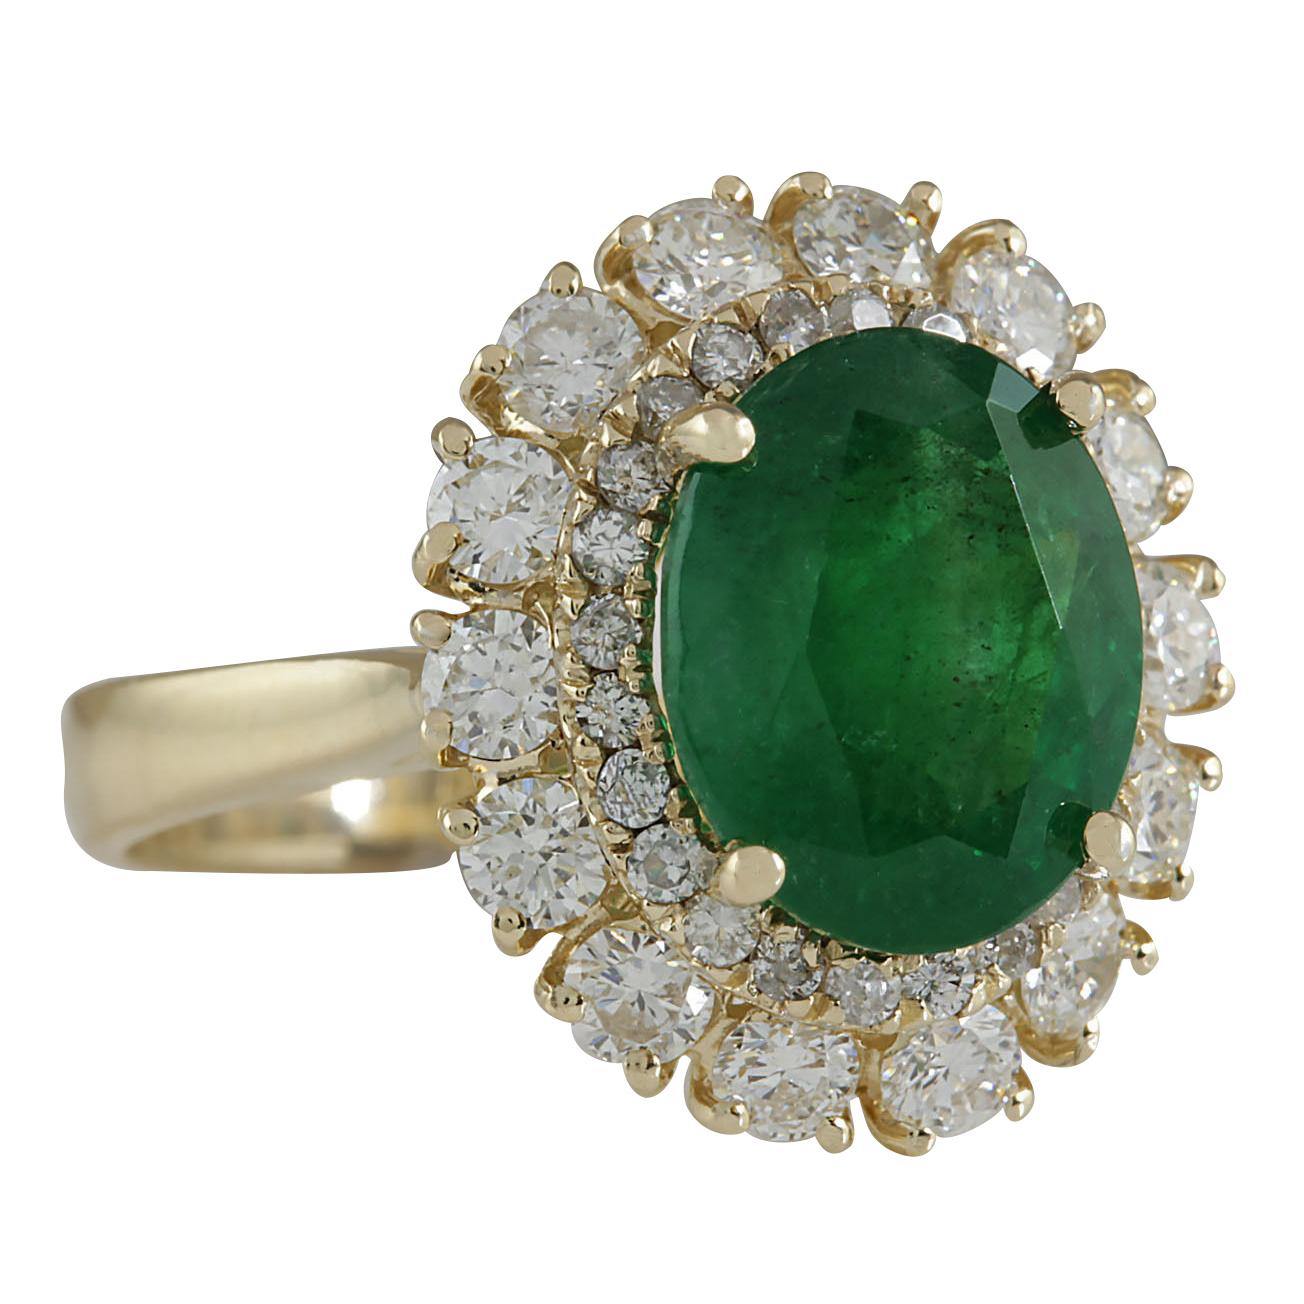 6.29 Carat Emerald 14 Karat Yellow Gold Diamond Ring
Stamped: 14K Yellow Gold
Total Ring Weight: 5.5 Grams
Total  Emerald Weight is 4.88 Carat (Measures: 11.00x9.00 mm)
Color: Green
Total  Diamond Weight is 1.41 Carat
Color: F-G, Clarity: